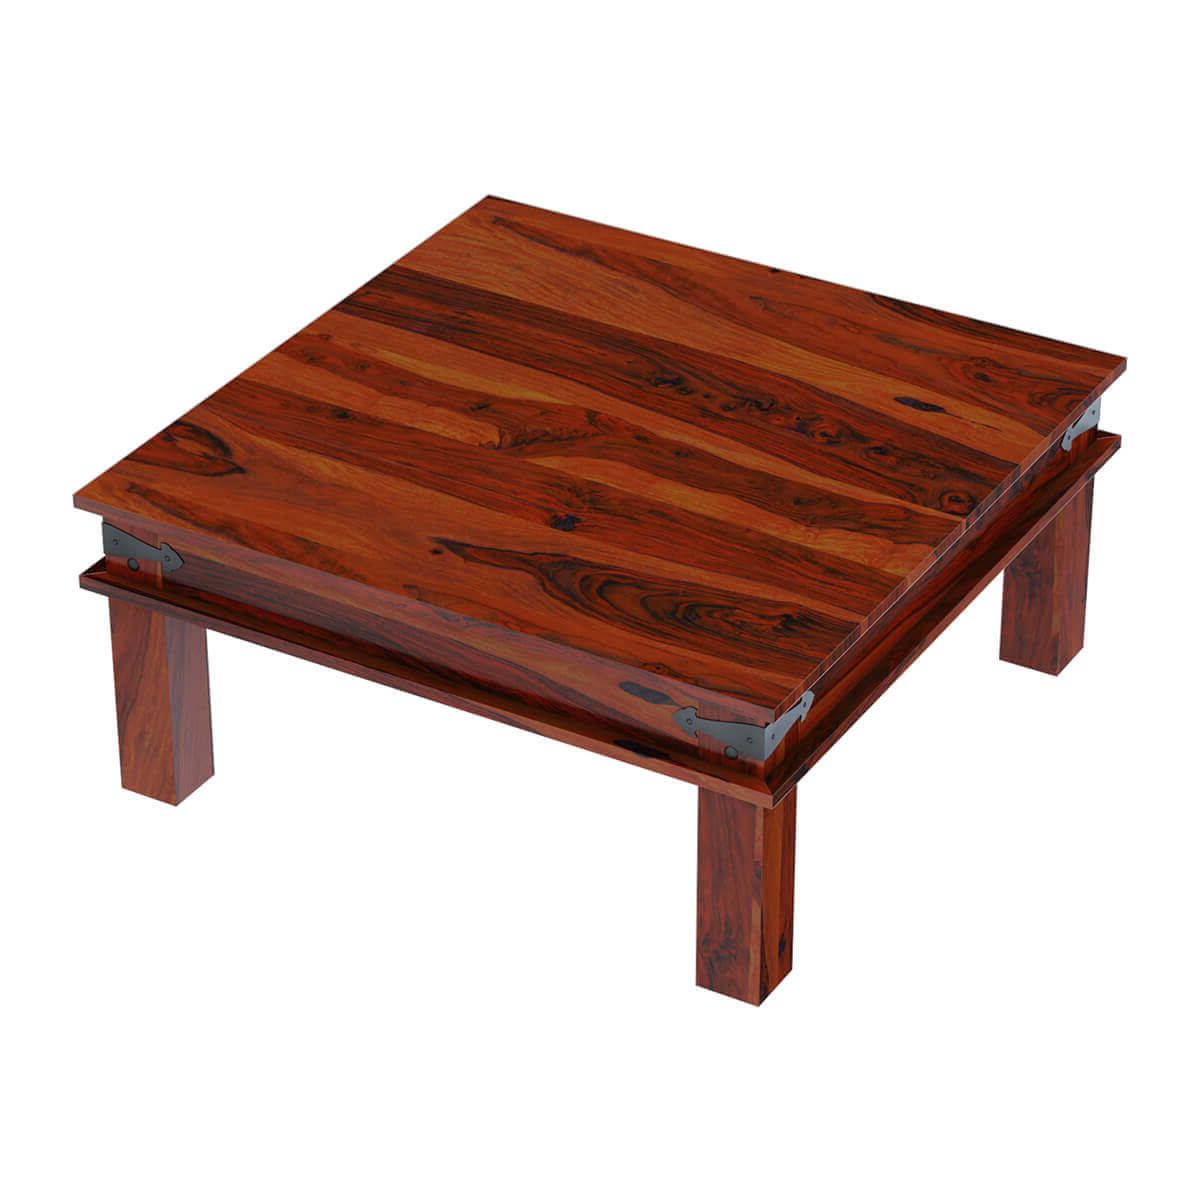 Altamont Transitional Solid Wood Square Coffee Table For Well Liked Smoke Gray Wood Square Coffee Tables (View 2 of 20)